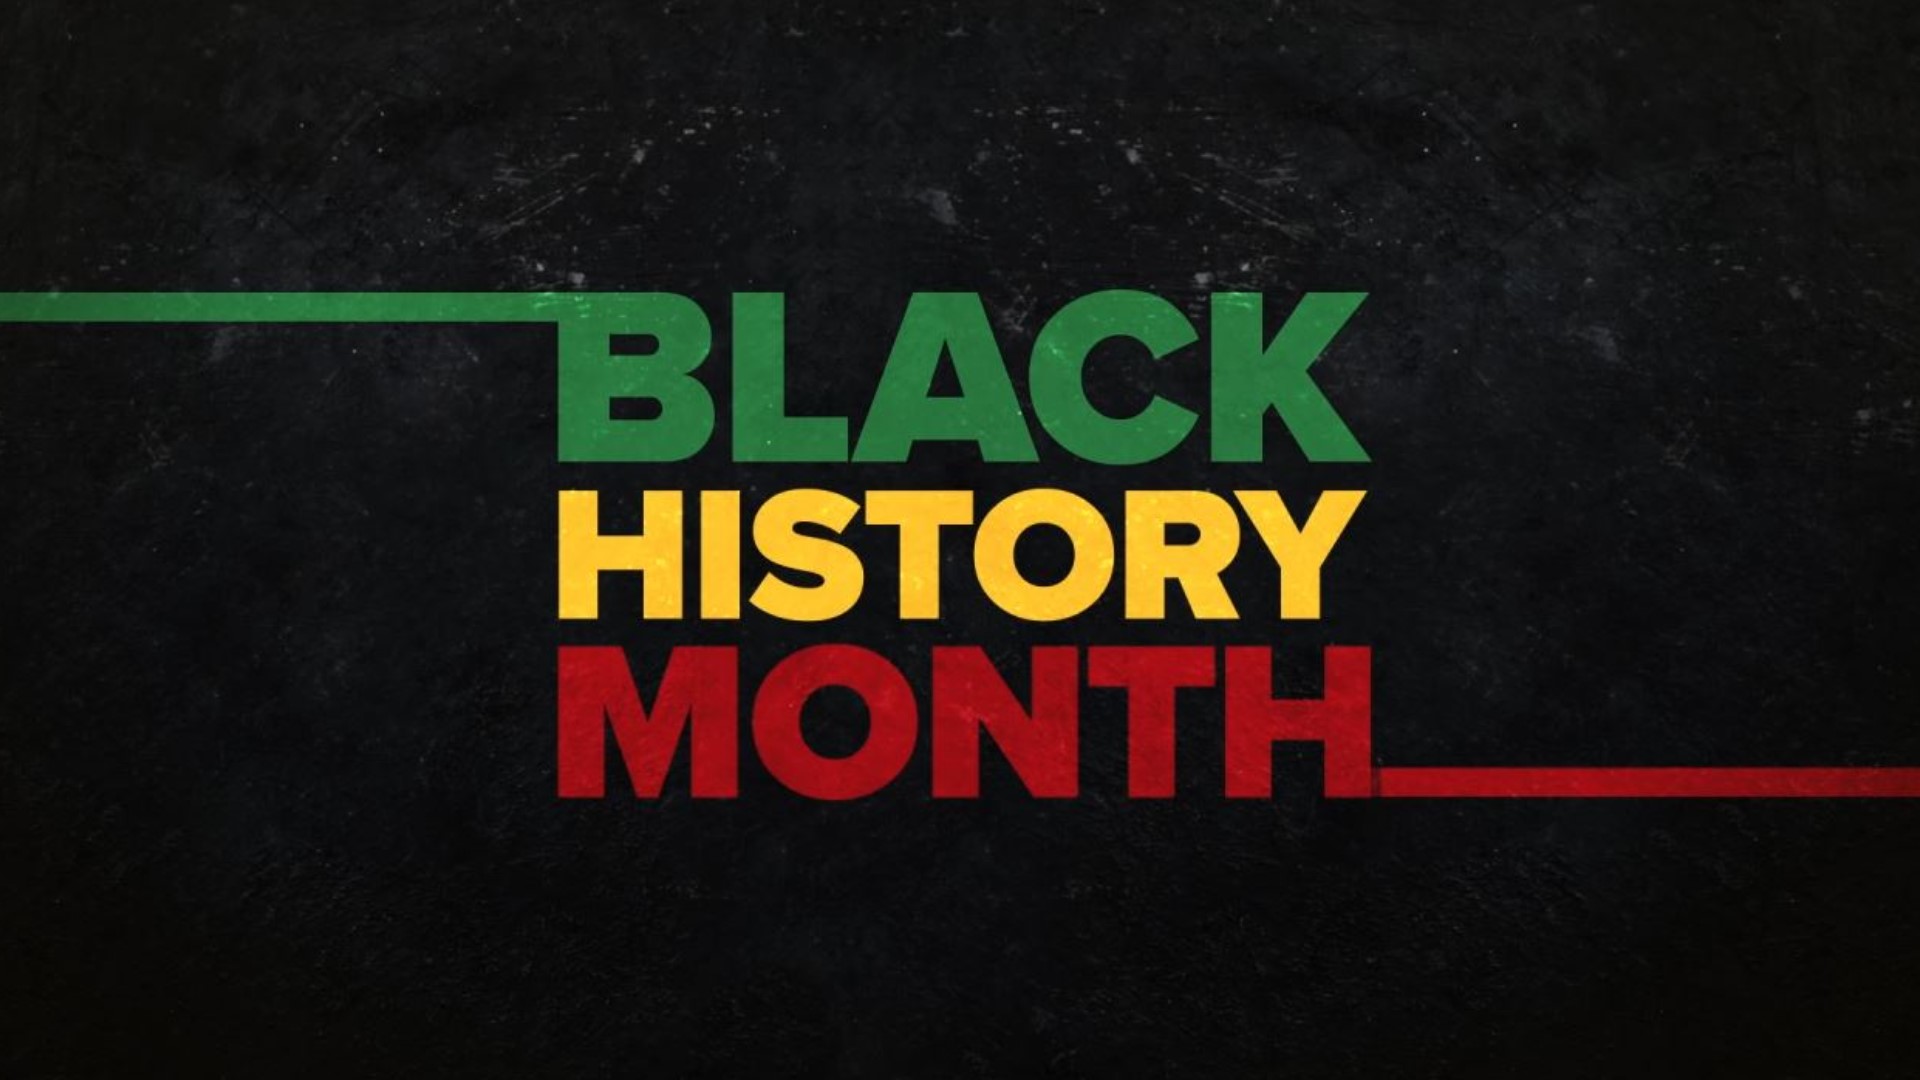 February is Black History Month, a time to celebrate & recognize the role African Americans have played in our history. With it are some events to educate & inspire.